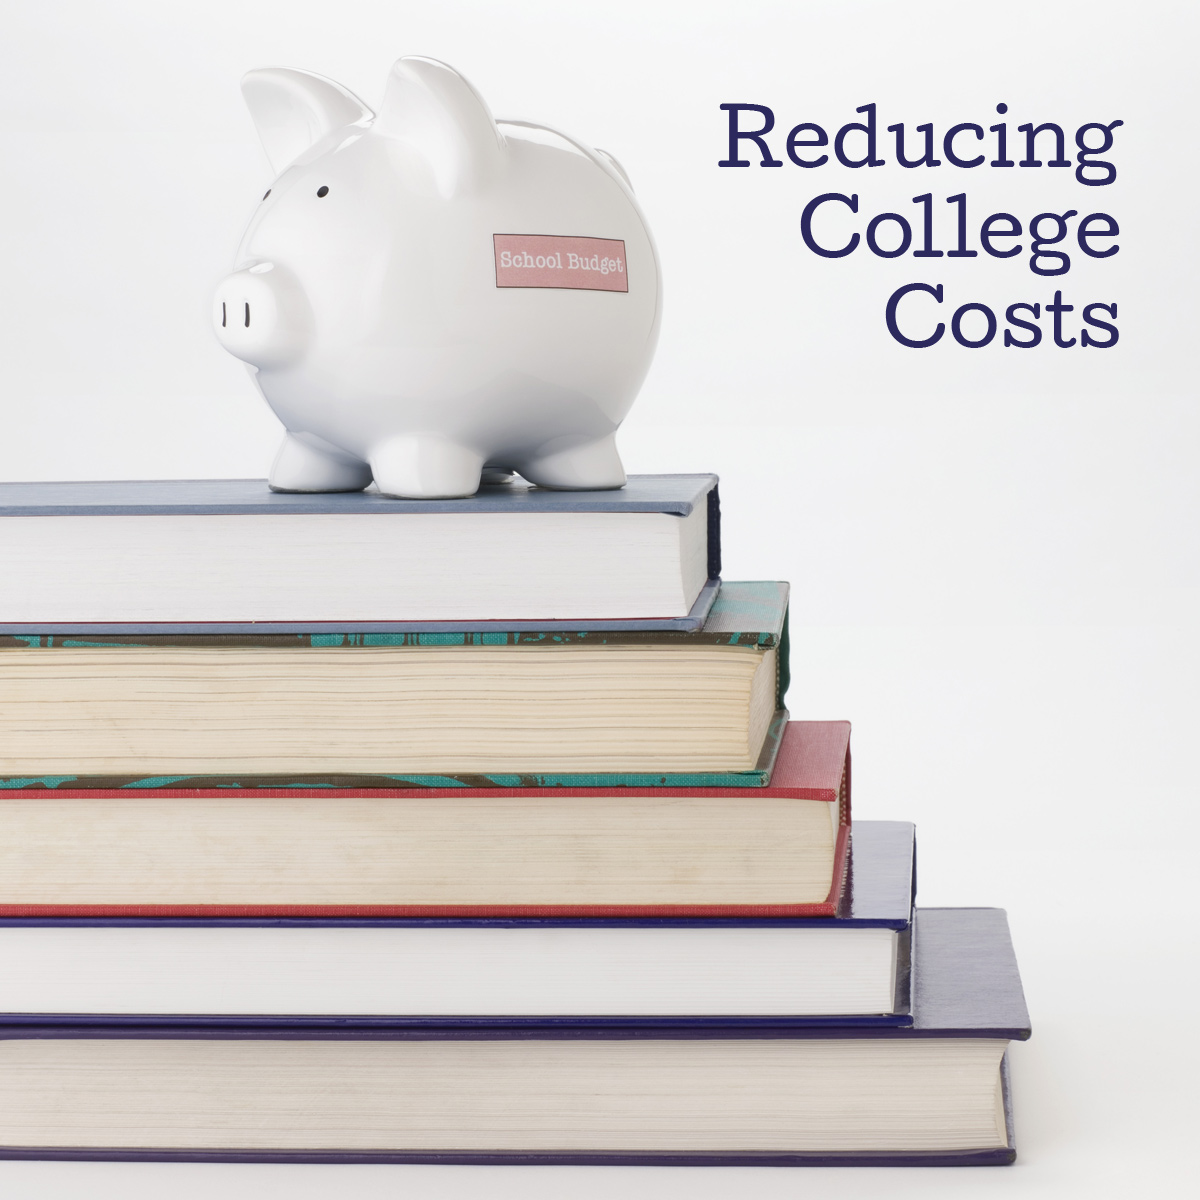 Reducing College Costs